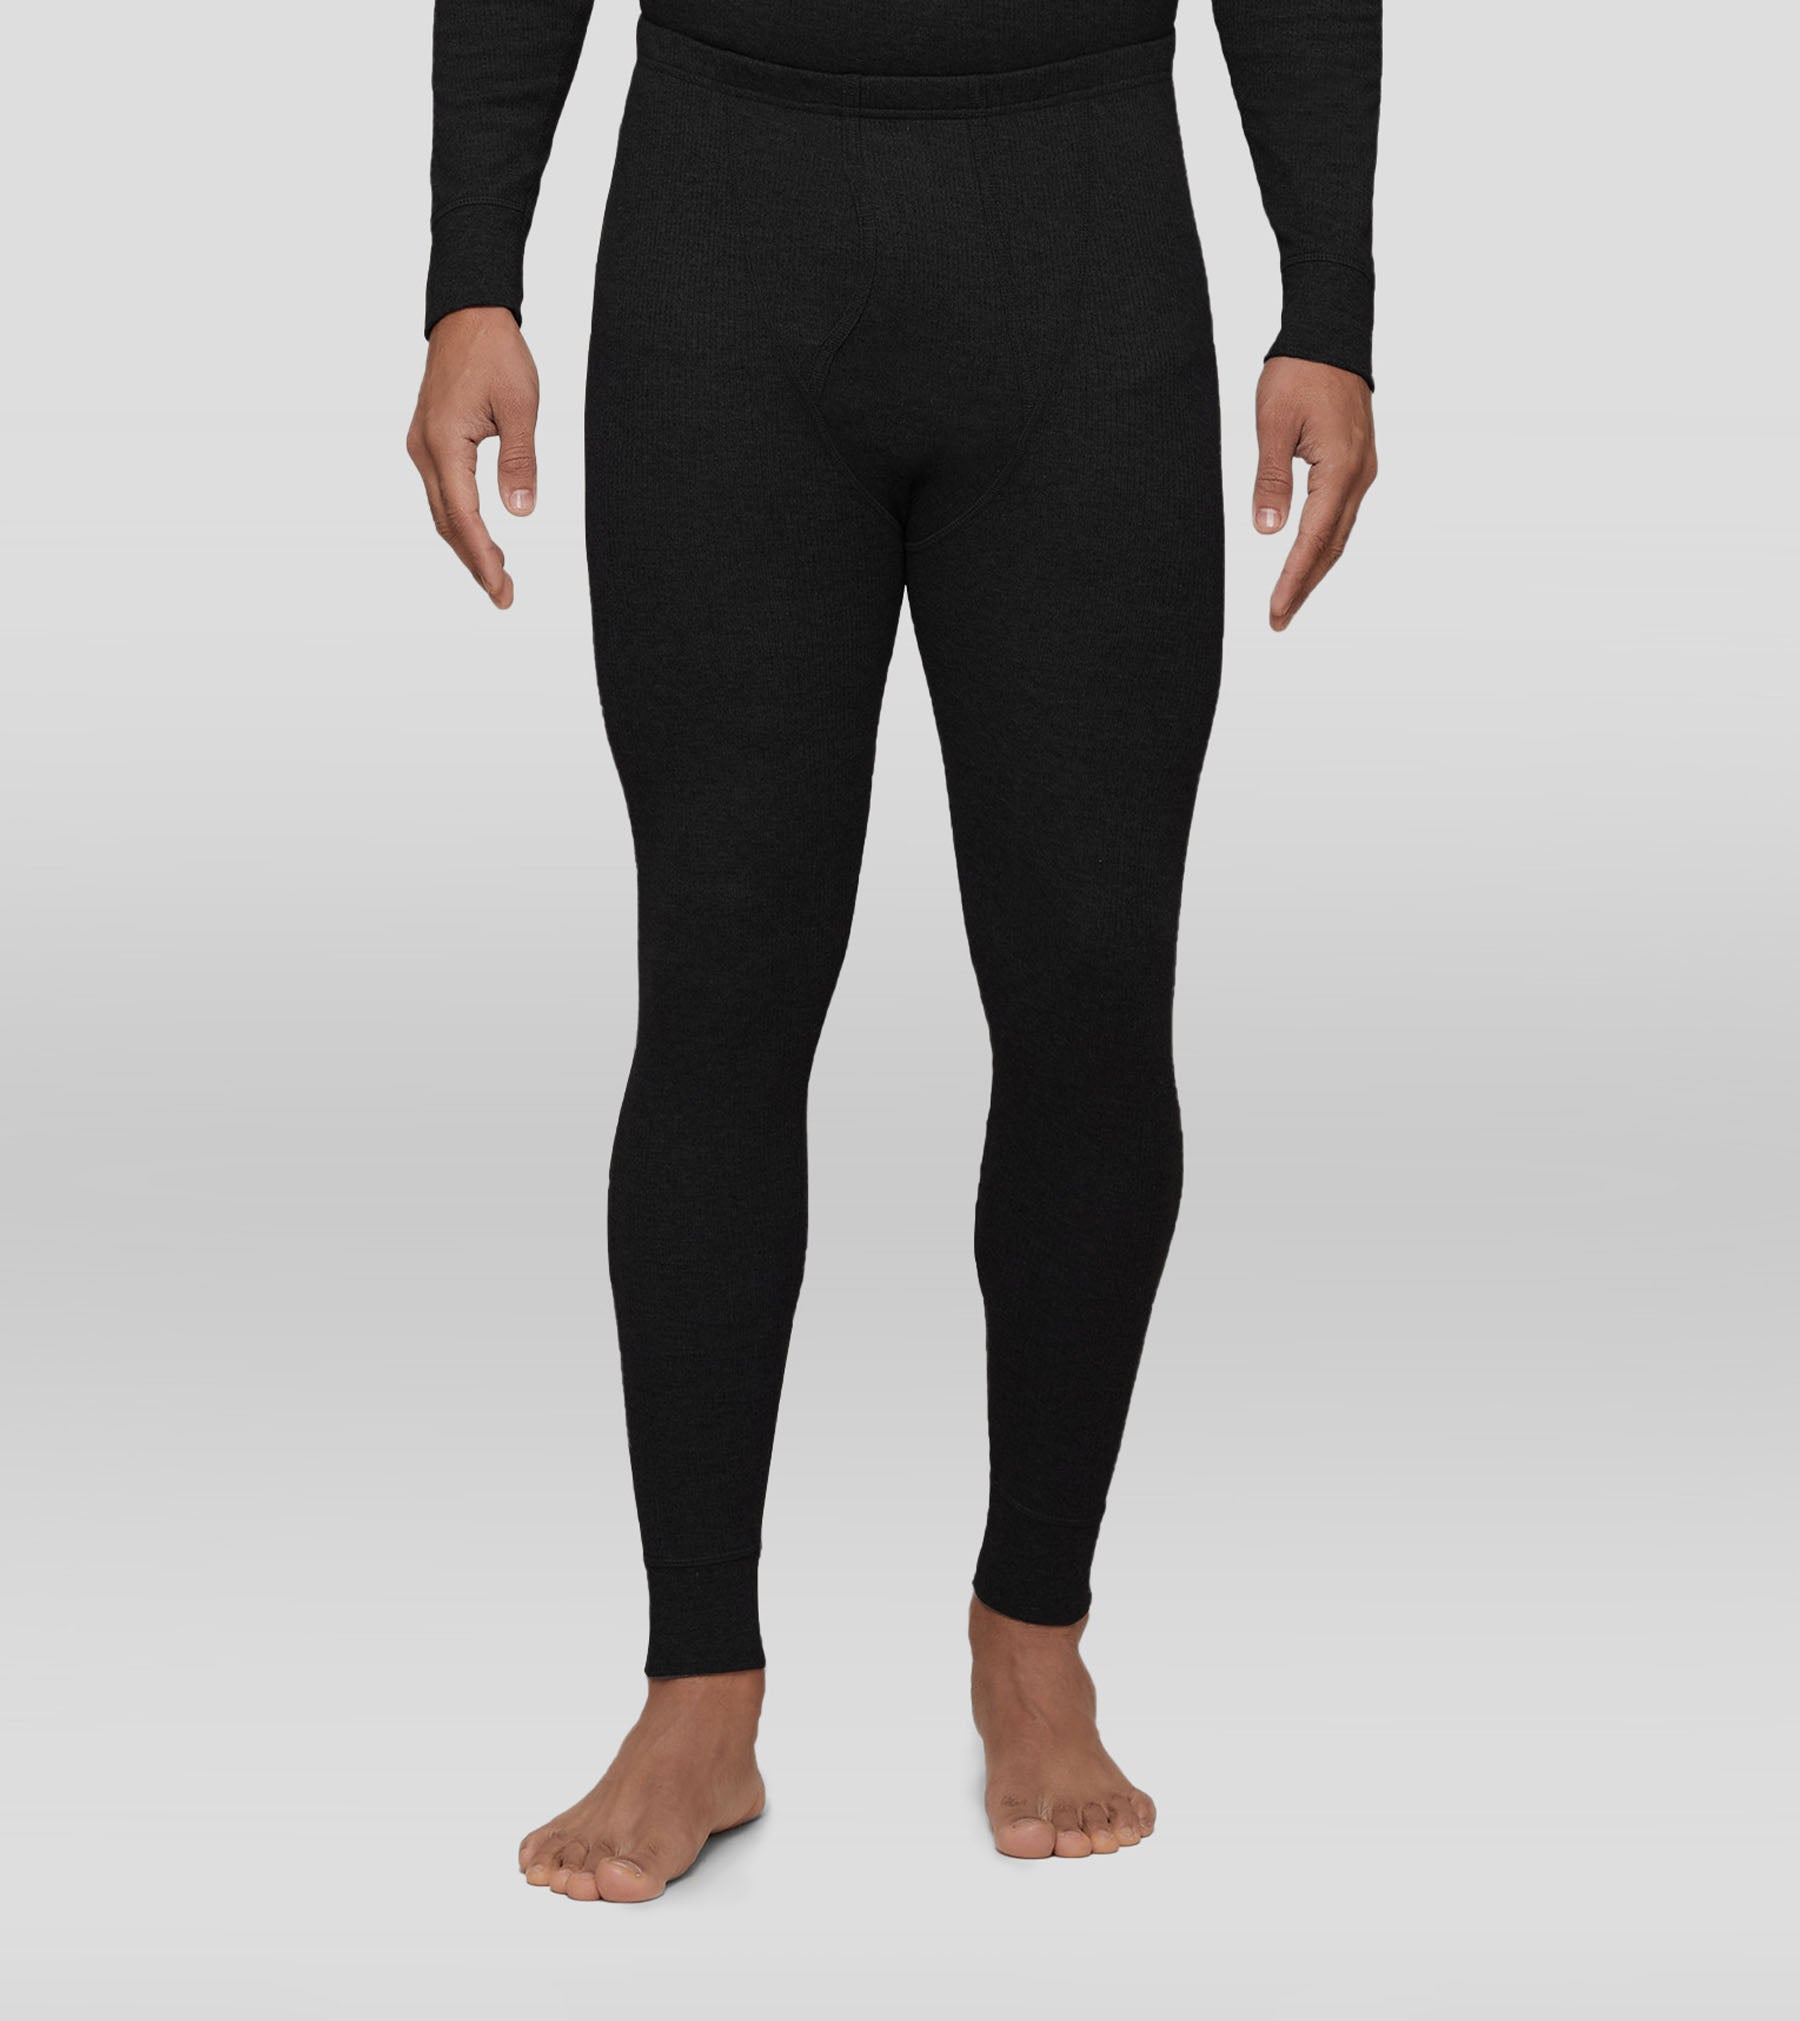 Mens Thermal Underwear Extreme Cold Weather Long Johns for Men